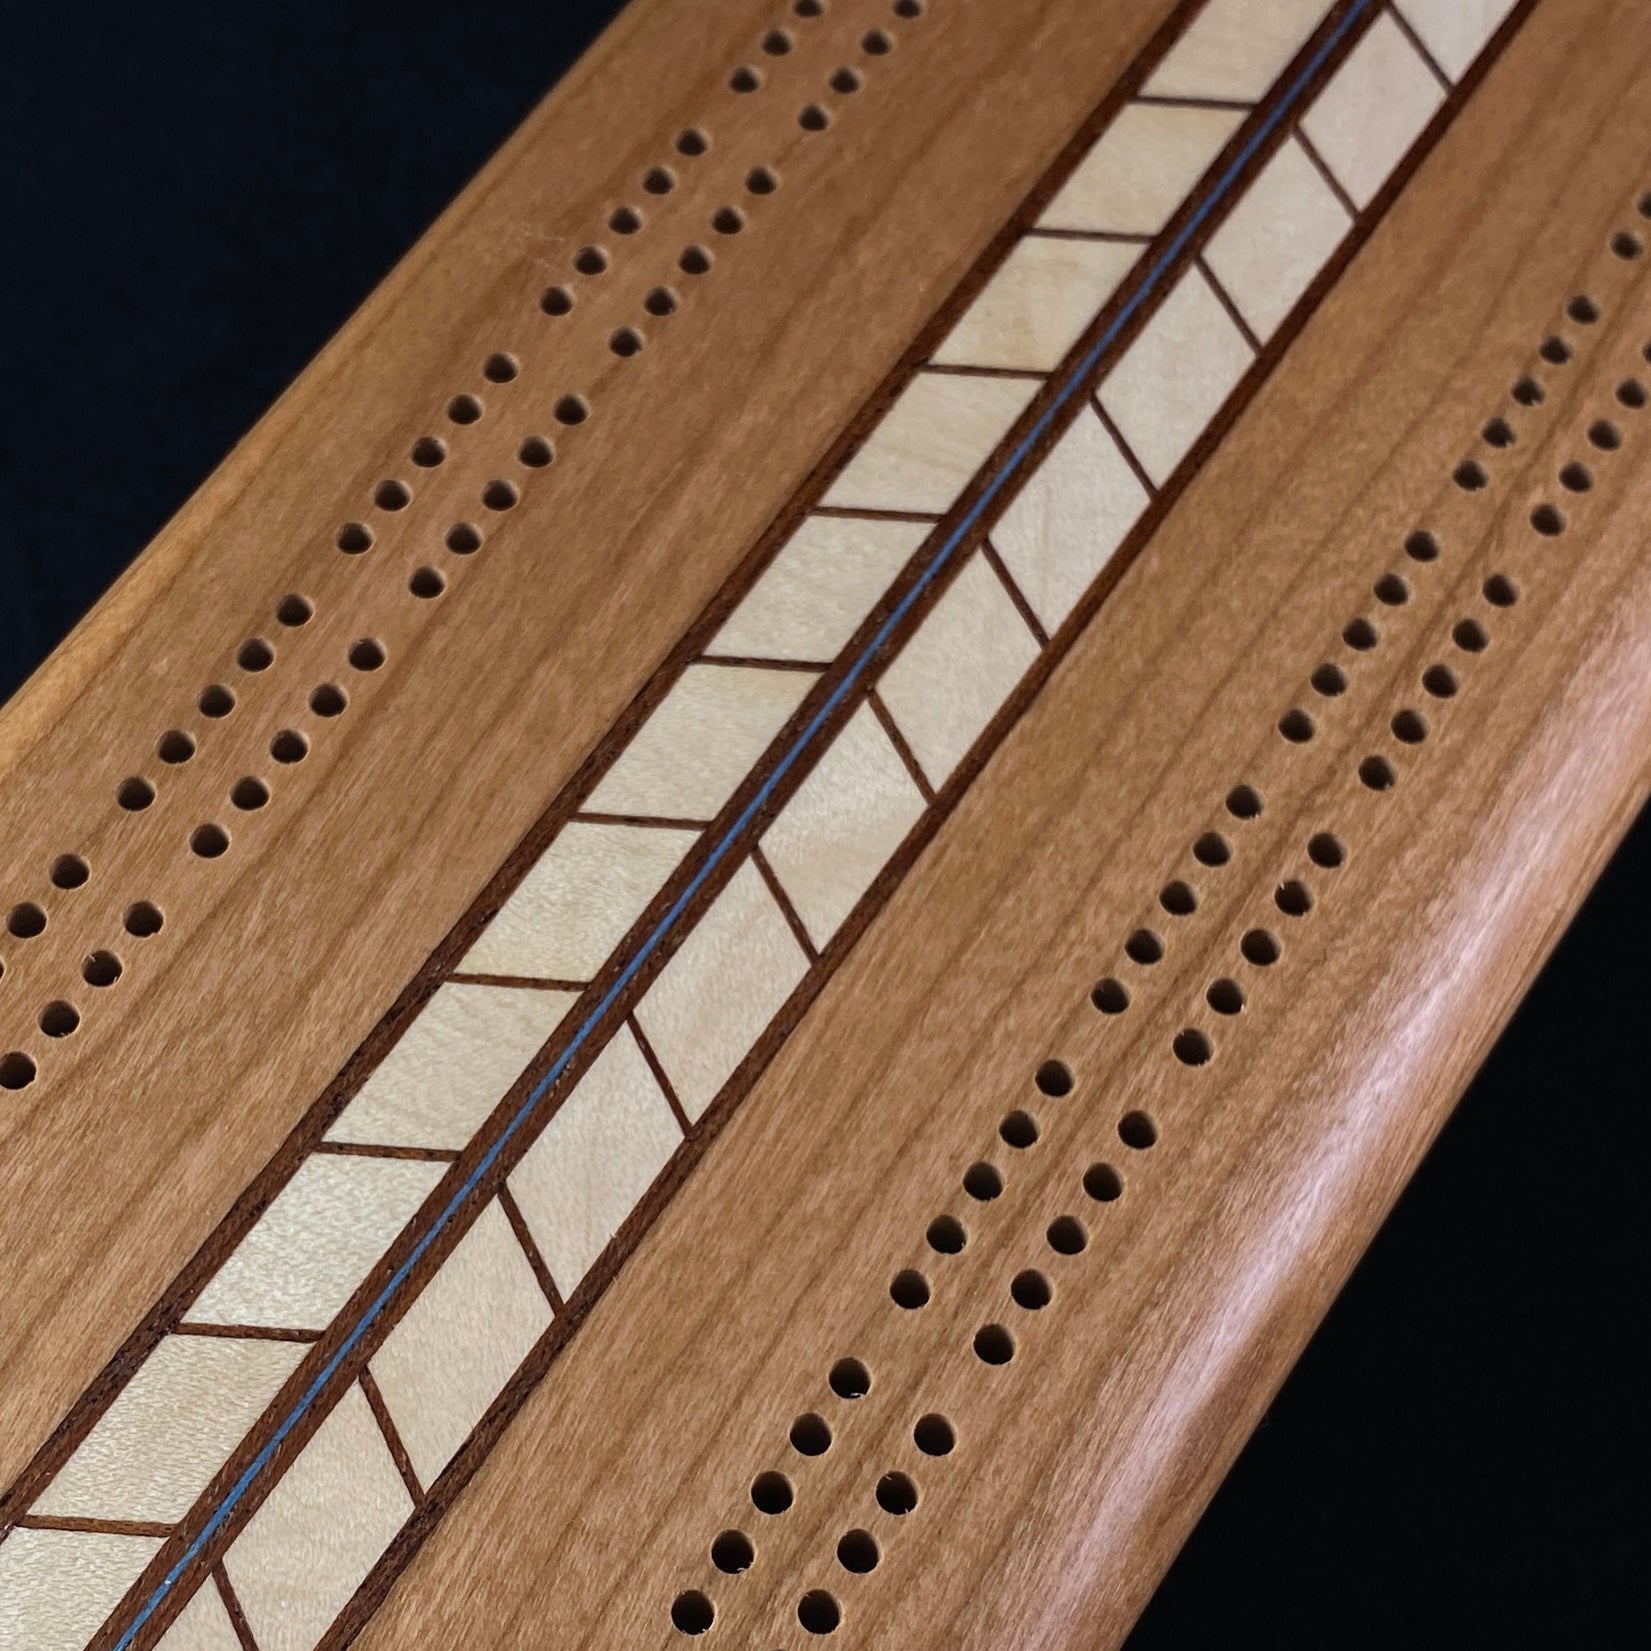 Handmade Wooden Cribbage Board with Cards and Pegs Geometric